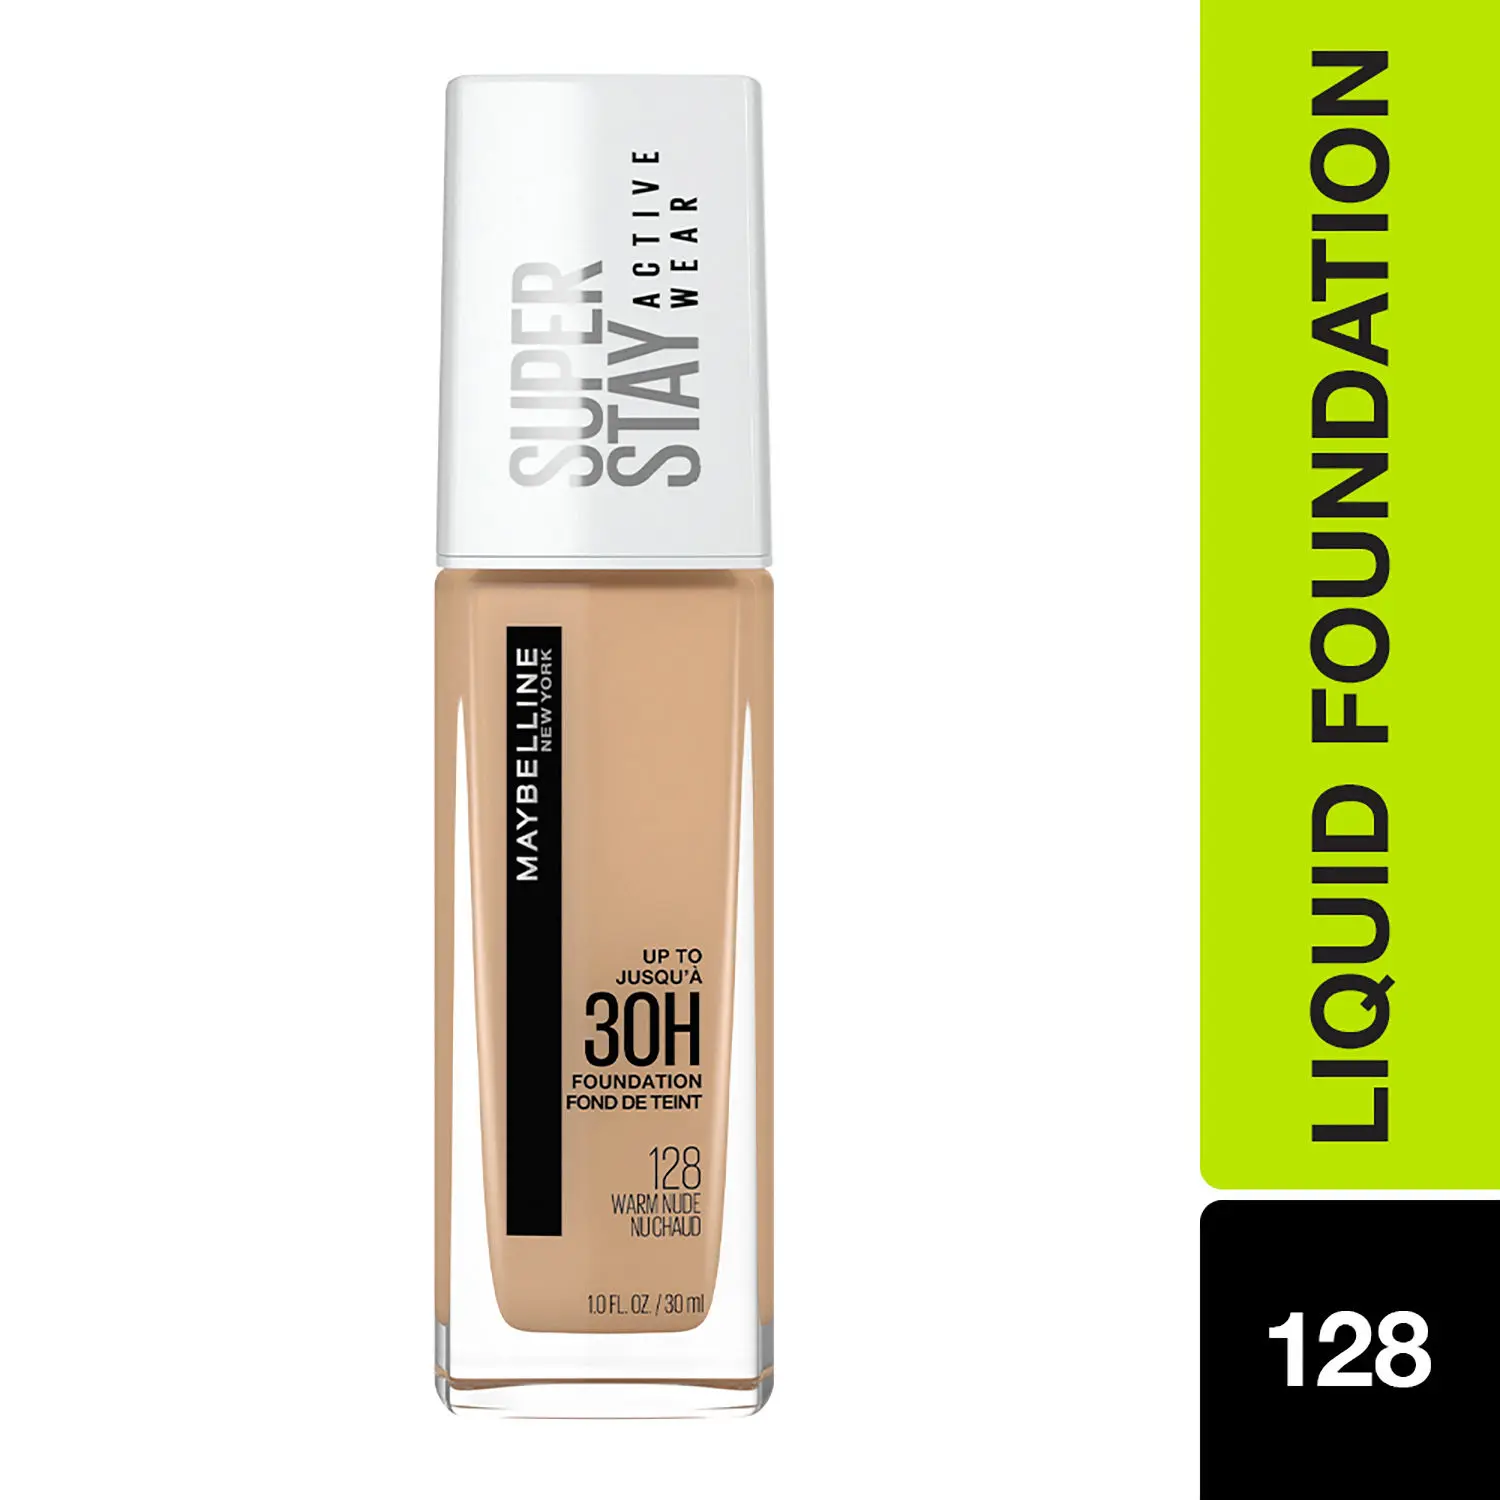 Maybelline New York Super Stay Full Coverage Active Wear Liquid Foundation, Matte Finish with 30 HR Wear, Transfer Proof, 128, Warm Nude, 30ml